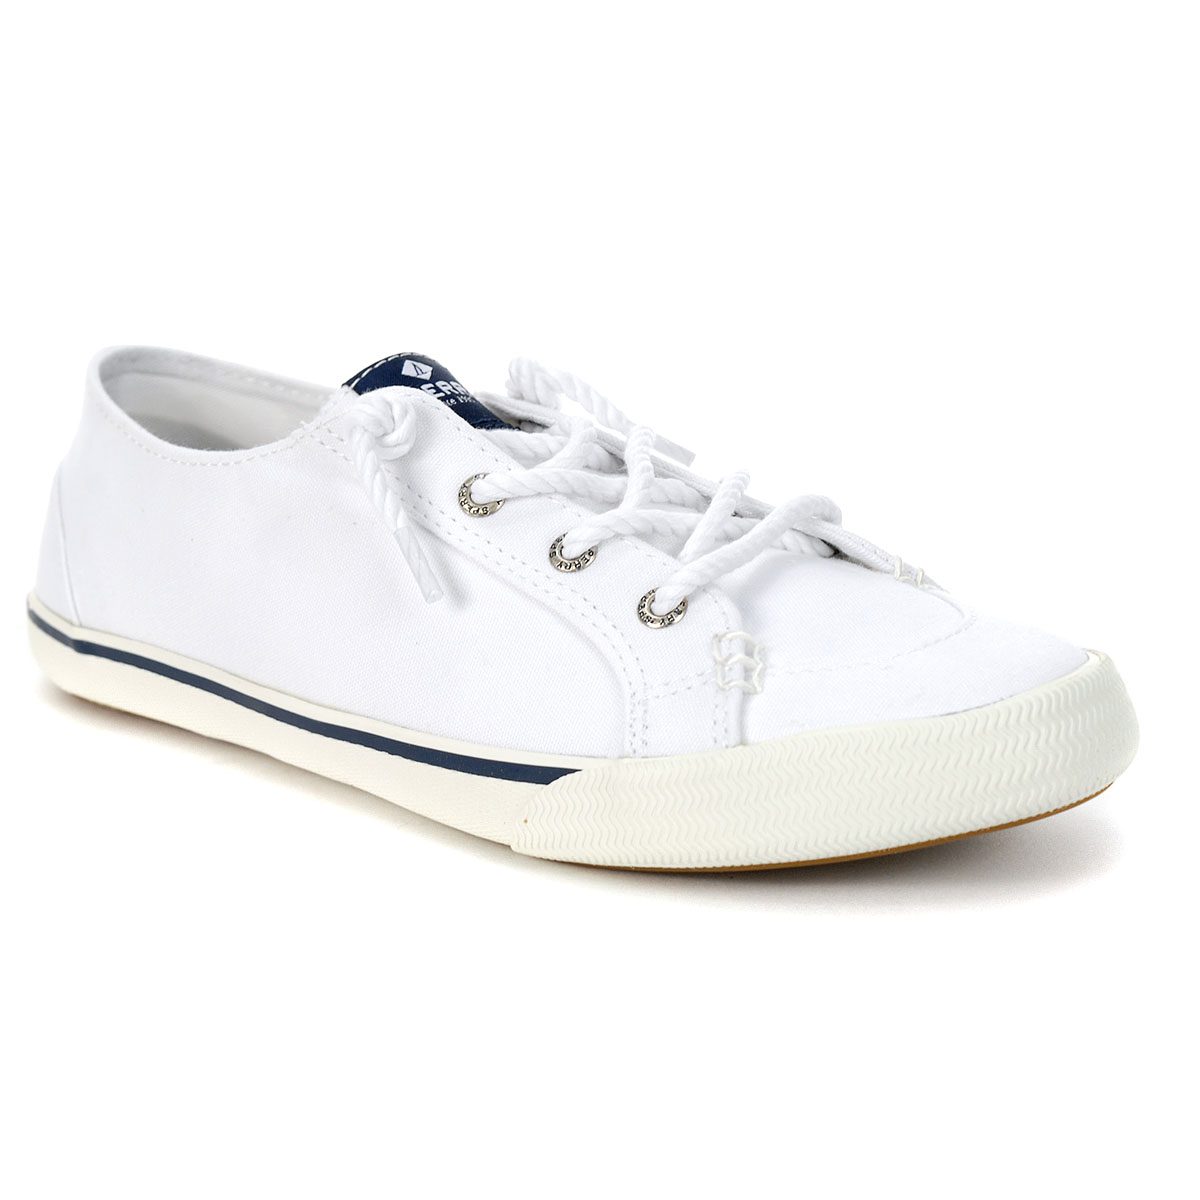 Sperry Top-Sider Women's Lounge LTT White Sneakers STS81823 - WOOKI.COM